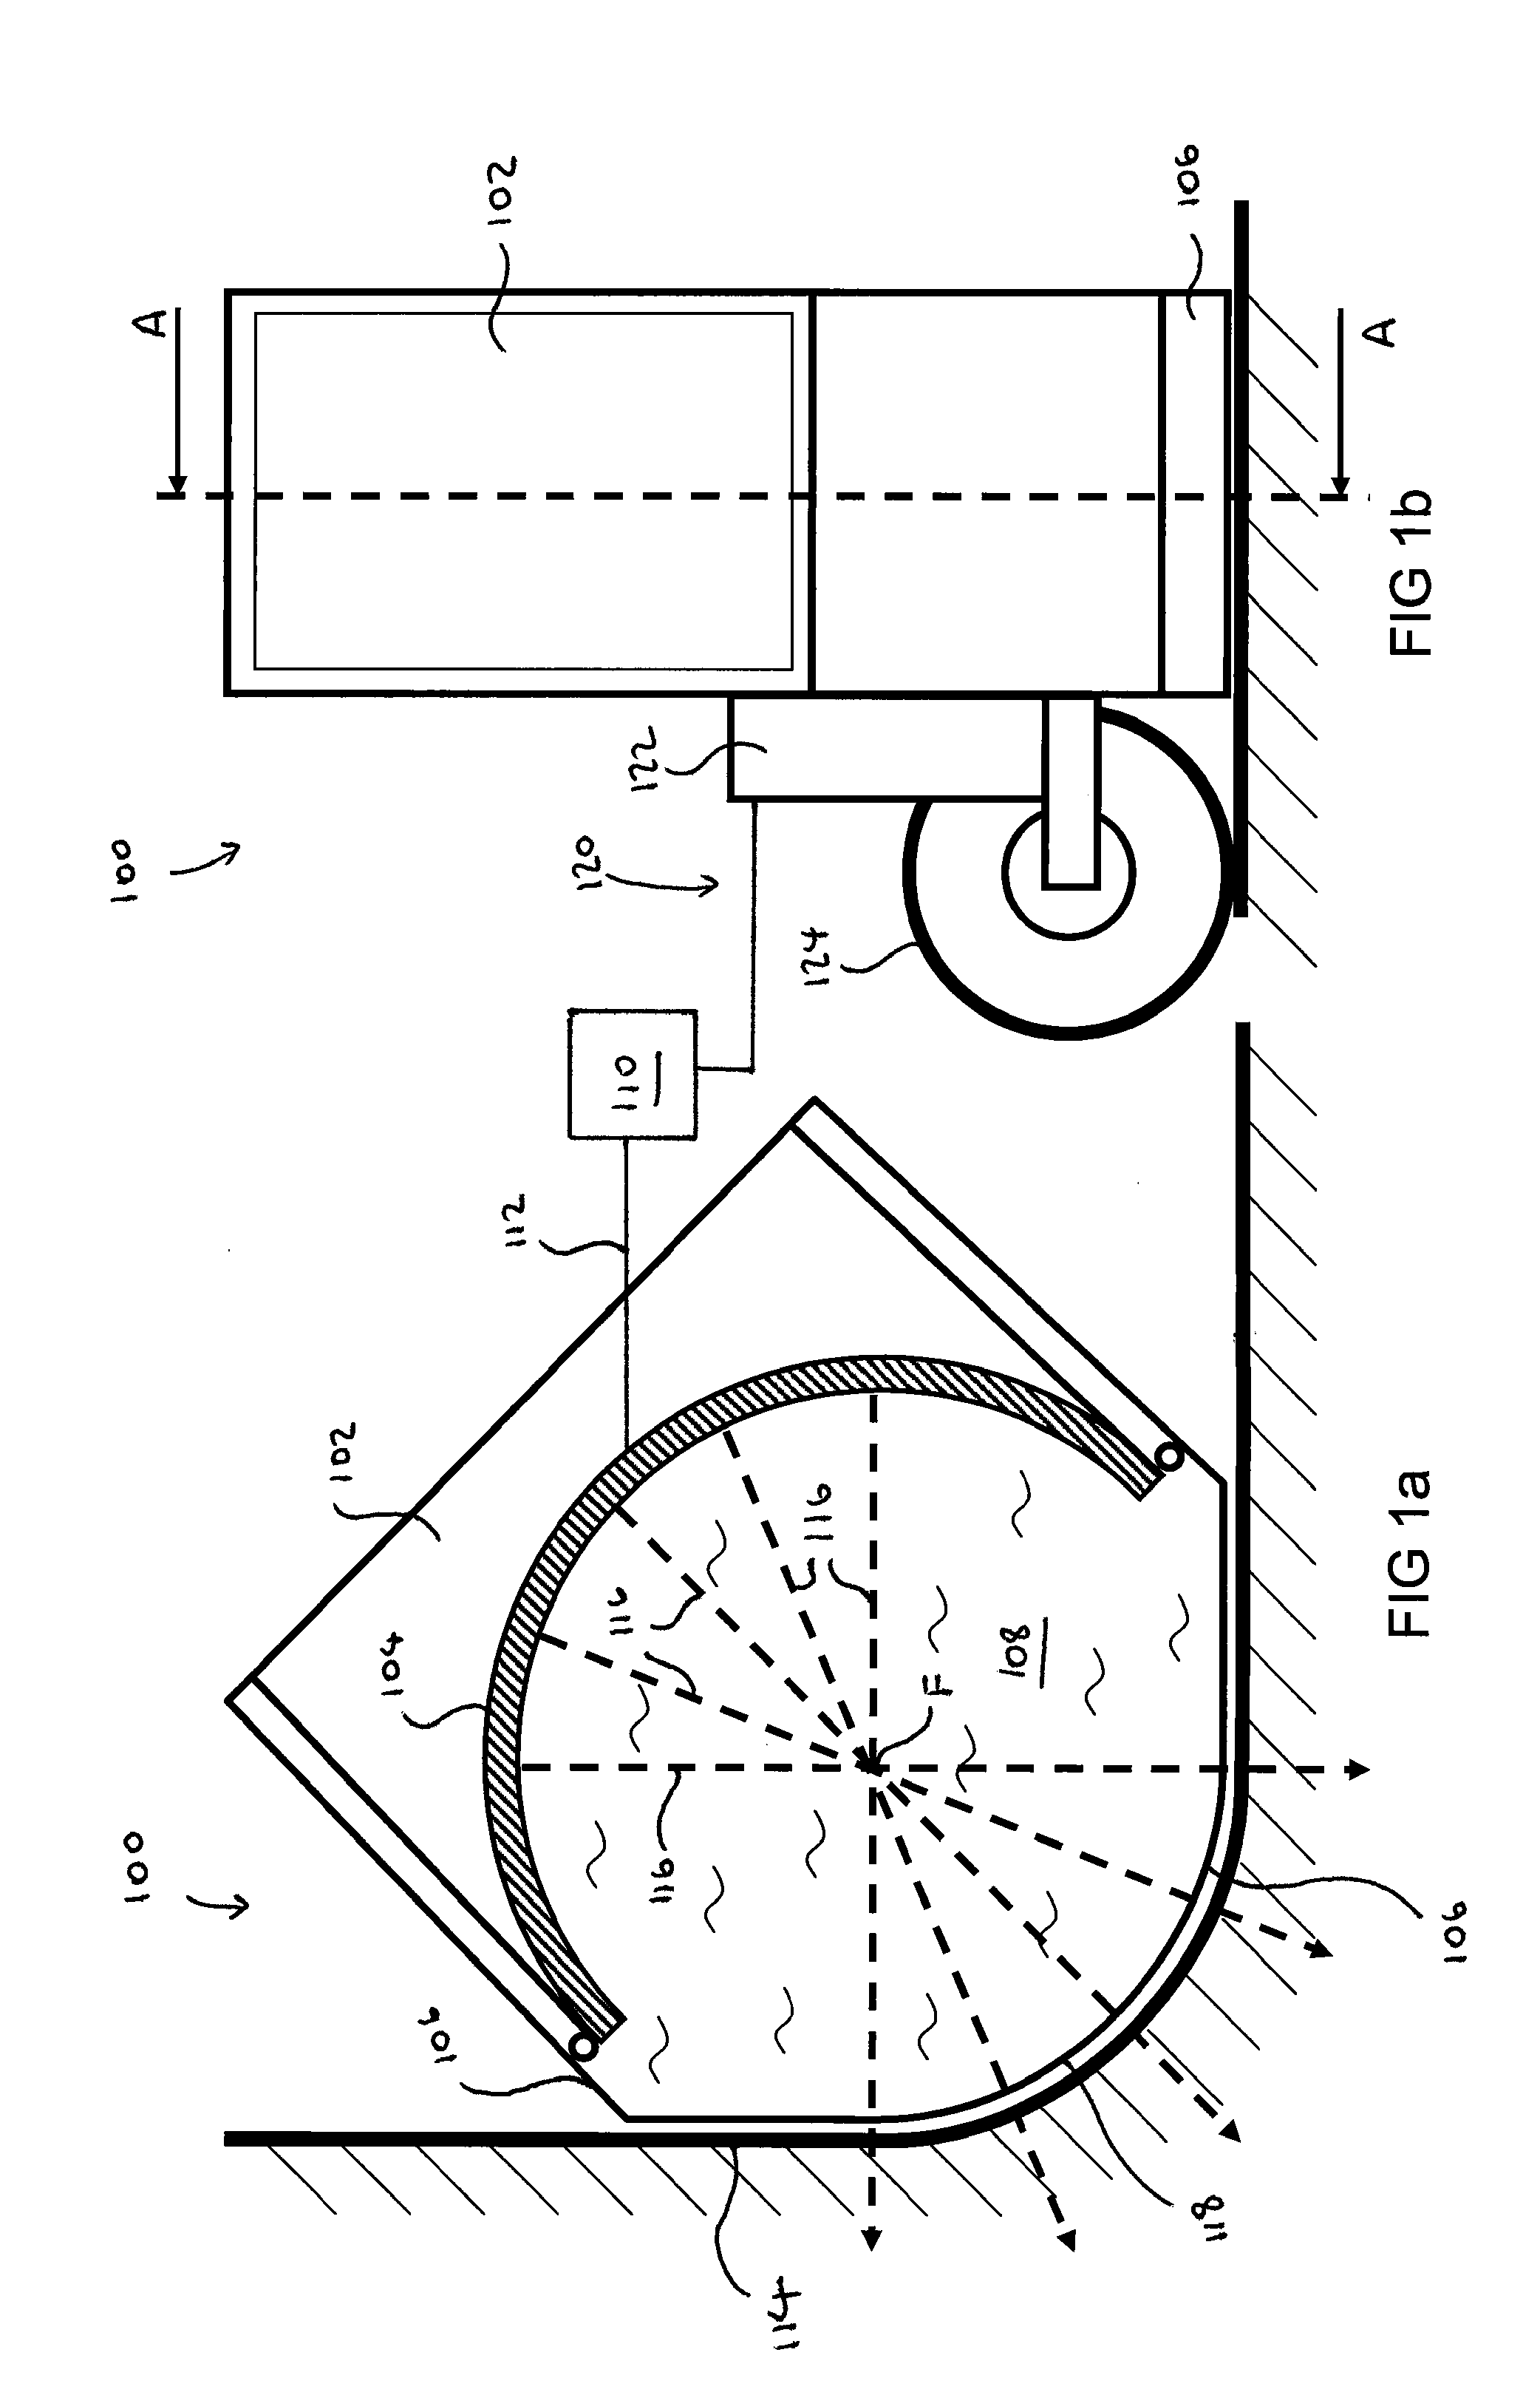 Inspection device